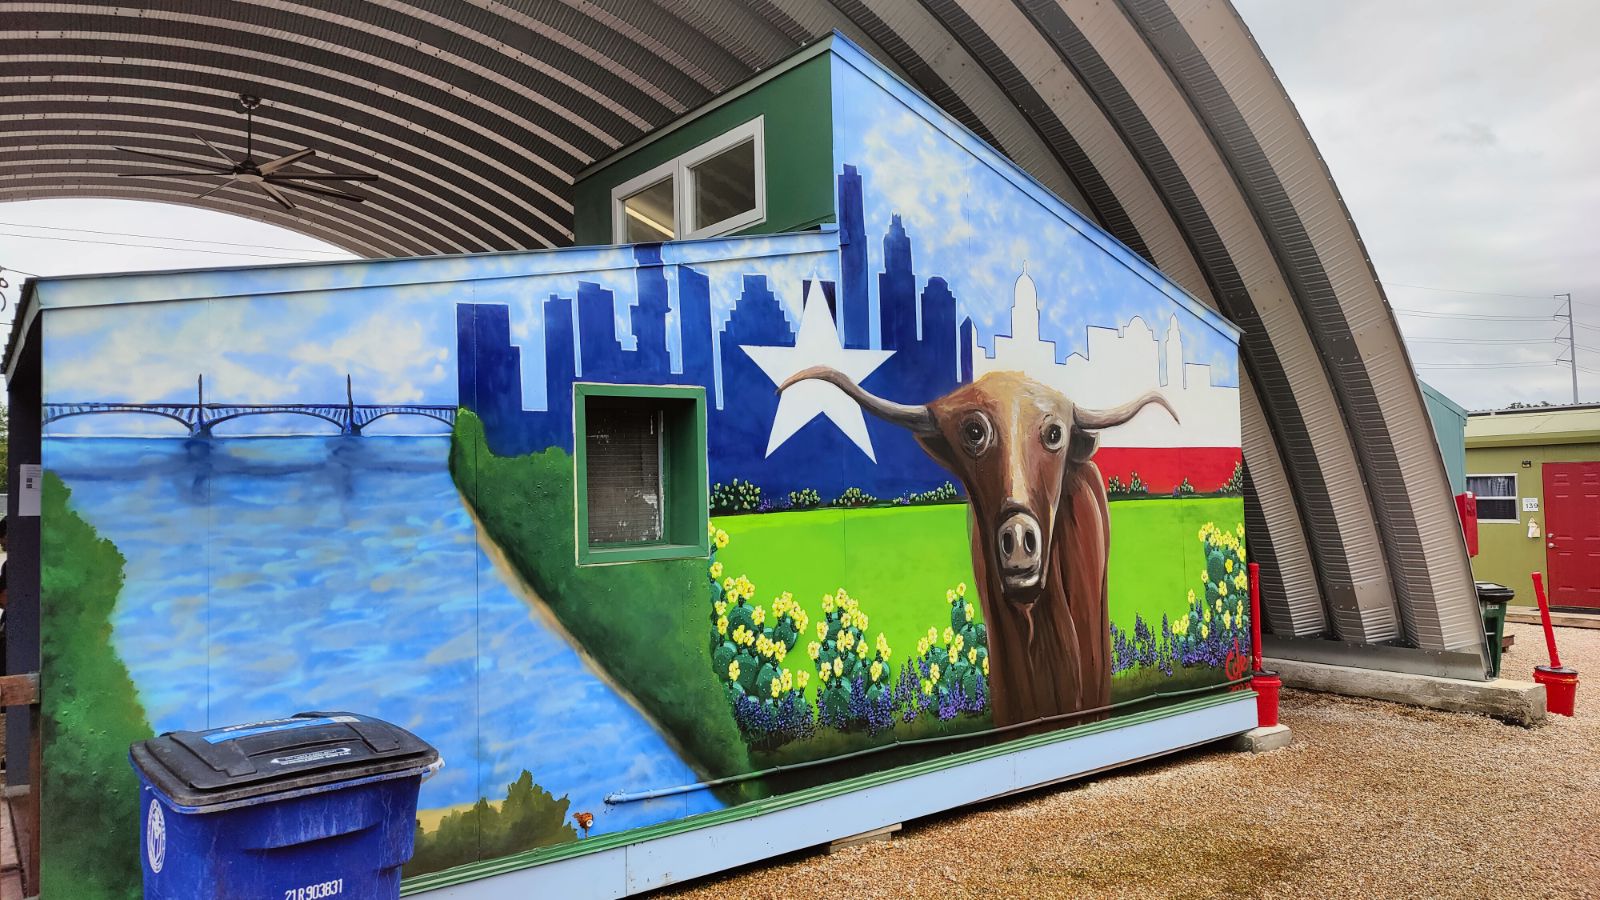 Mural showing longhorn on green lawn with Austin skyline painted like Texas flag